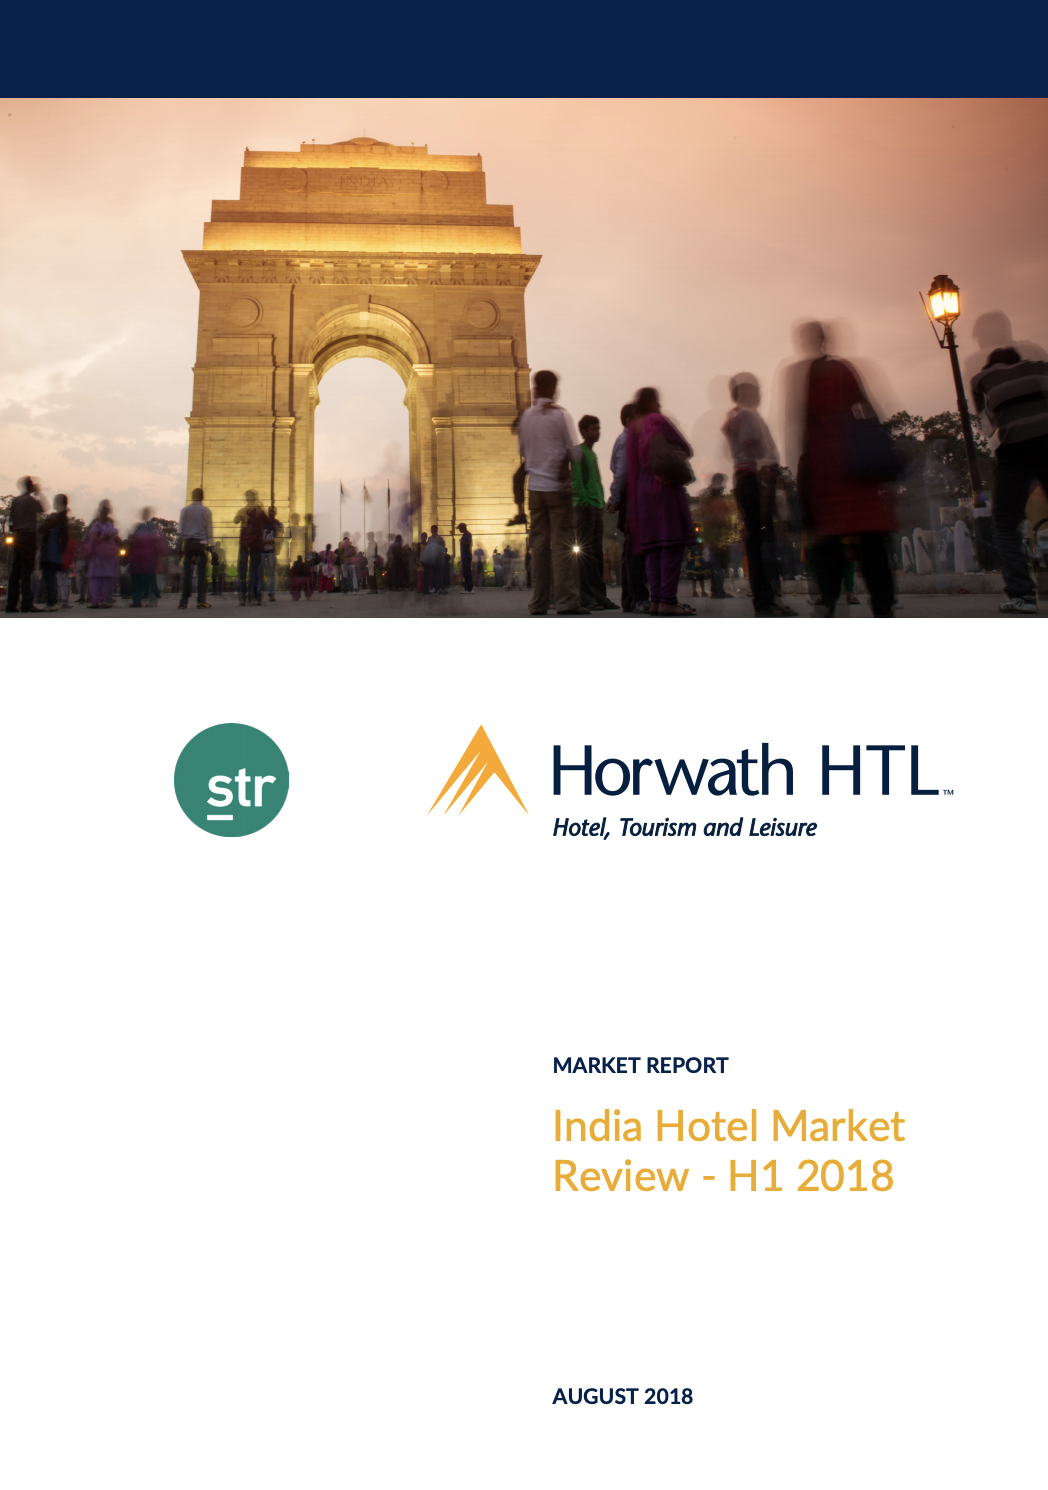 Market Report: India Hotel Review H1 2018